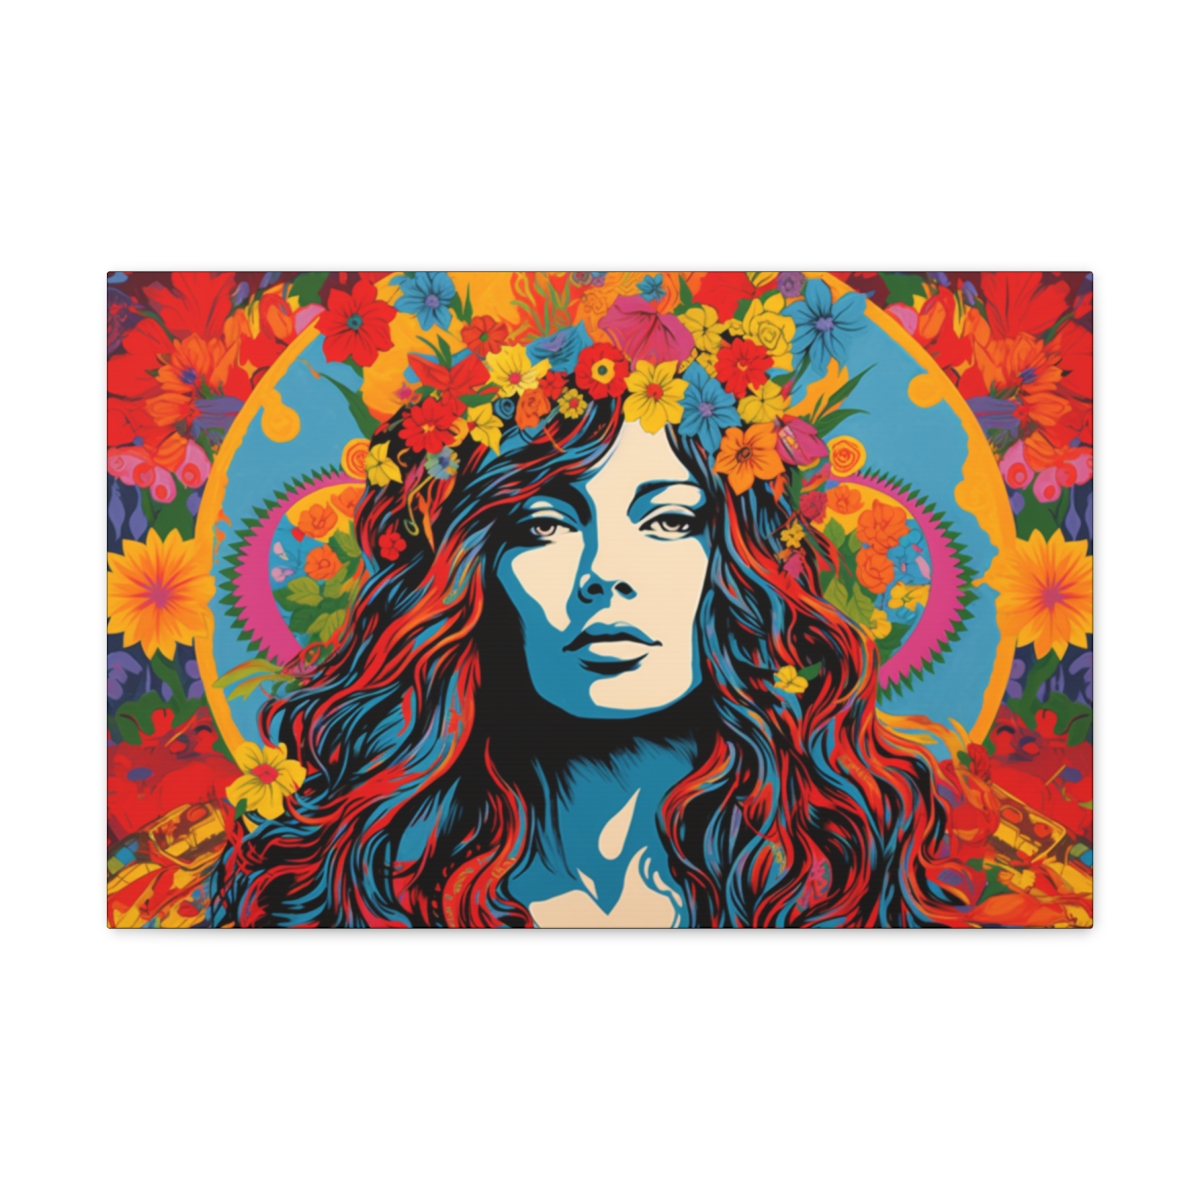 Hippie Trippy Flower Art Canvas Print: All For Love And Against War